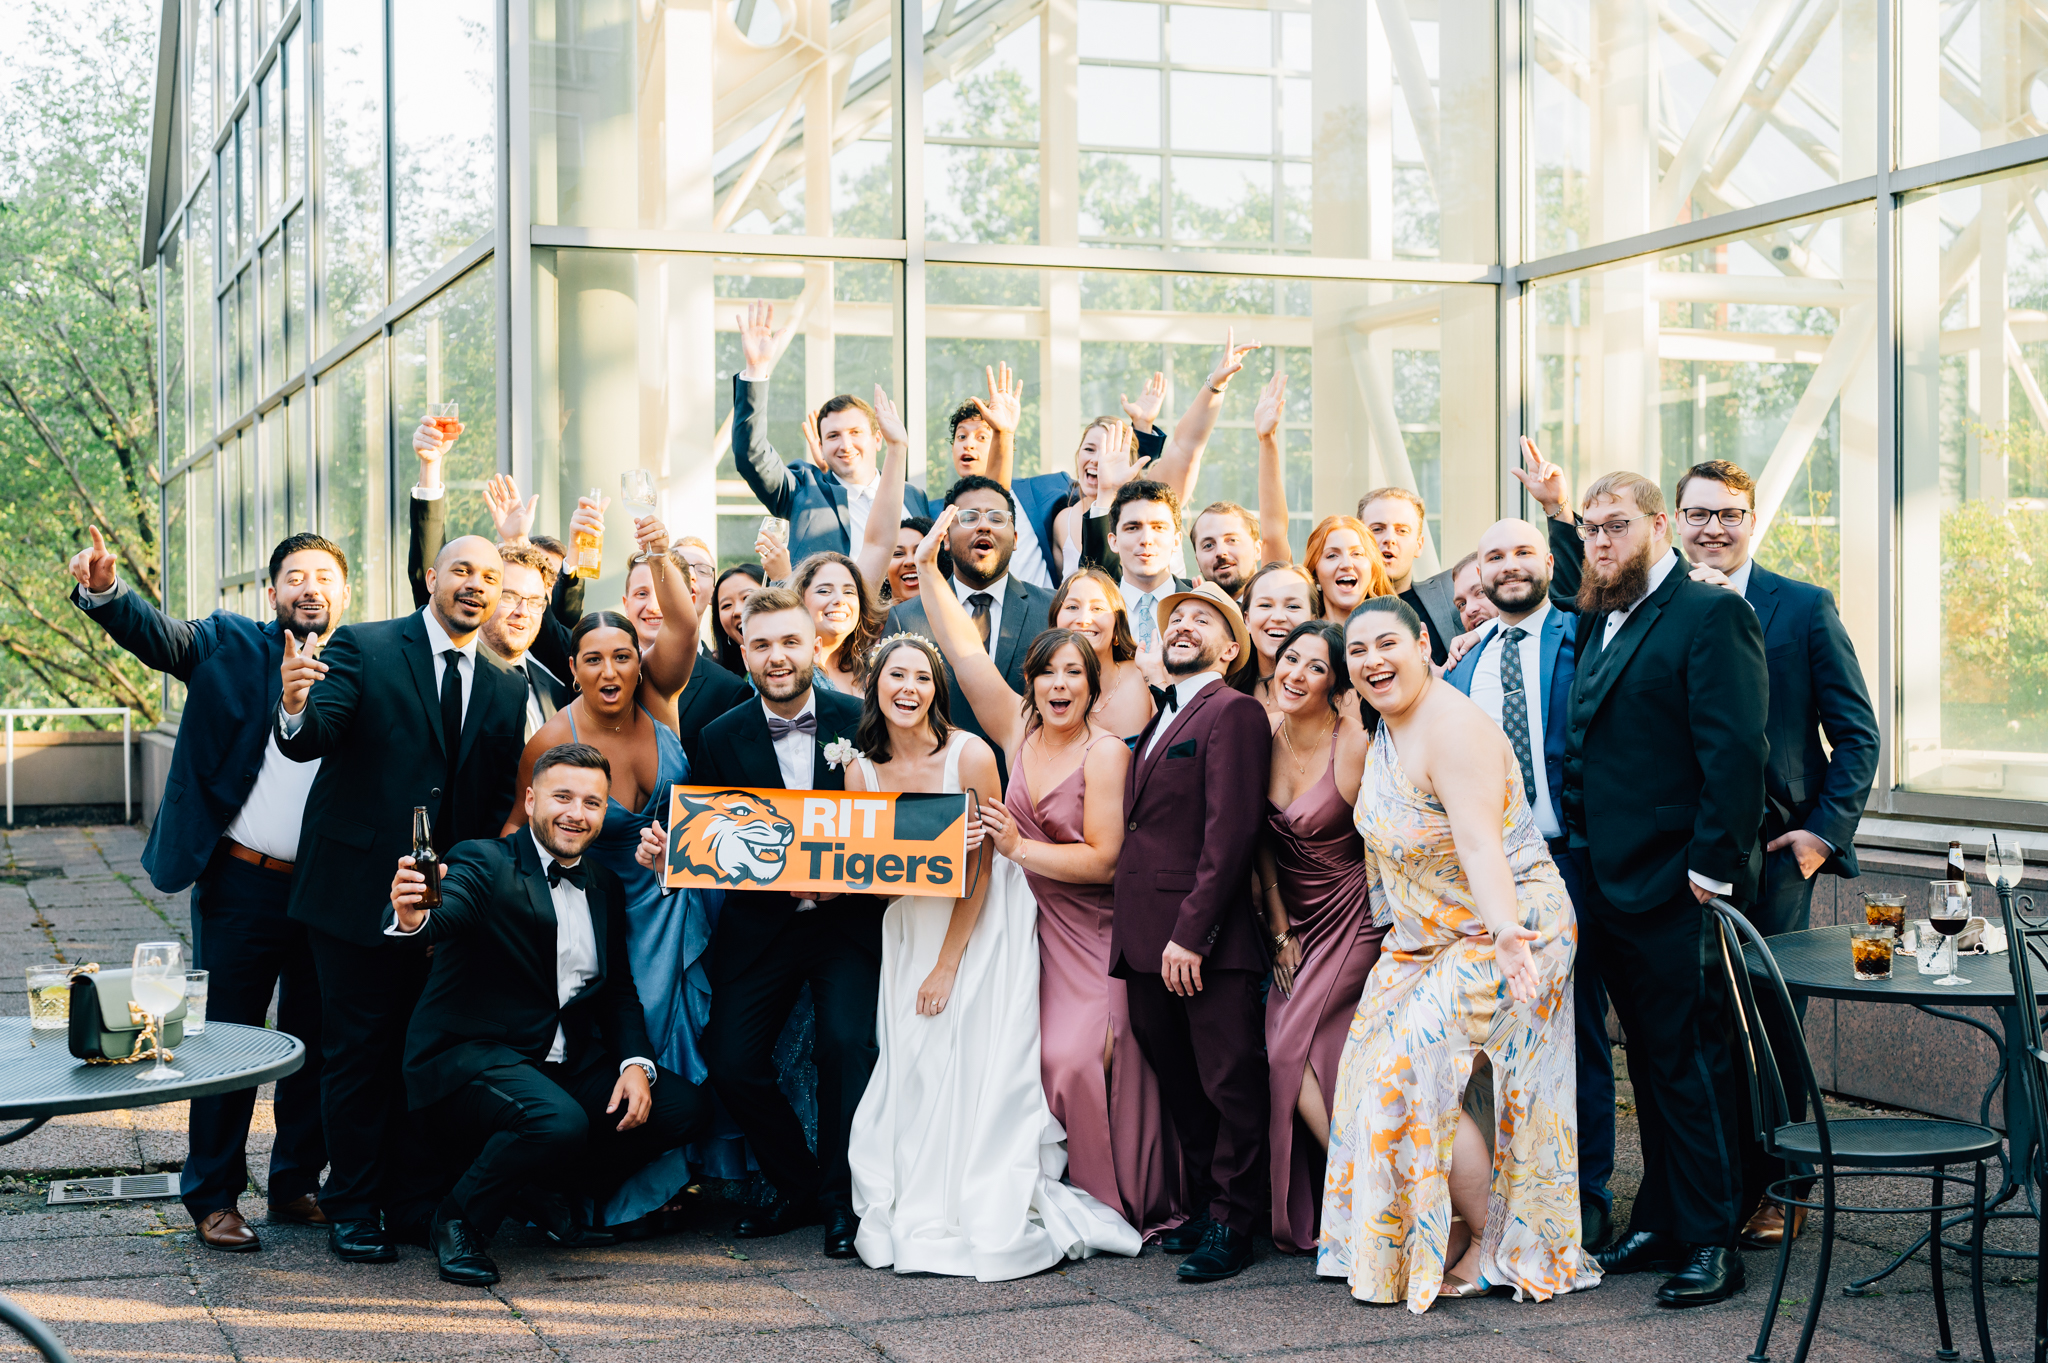 group photo of people at a wedding